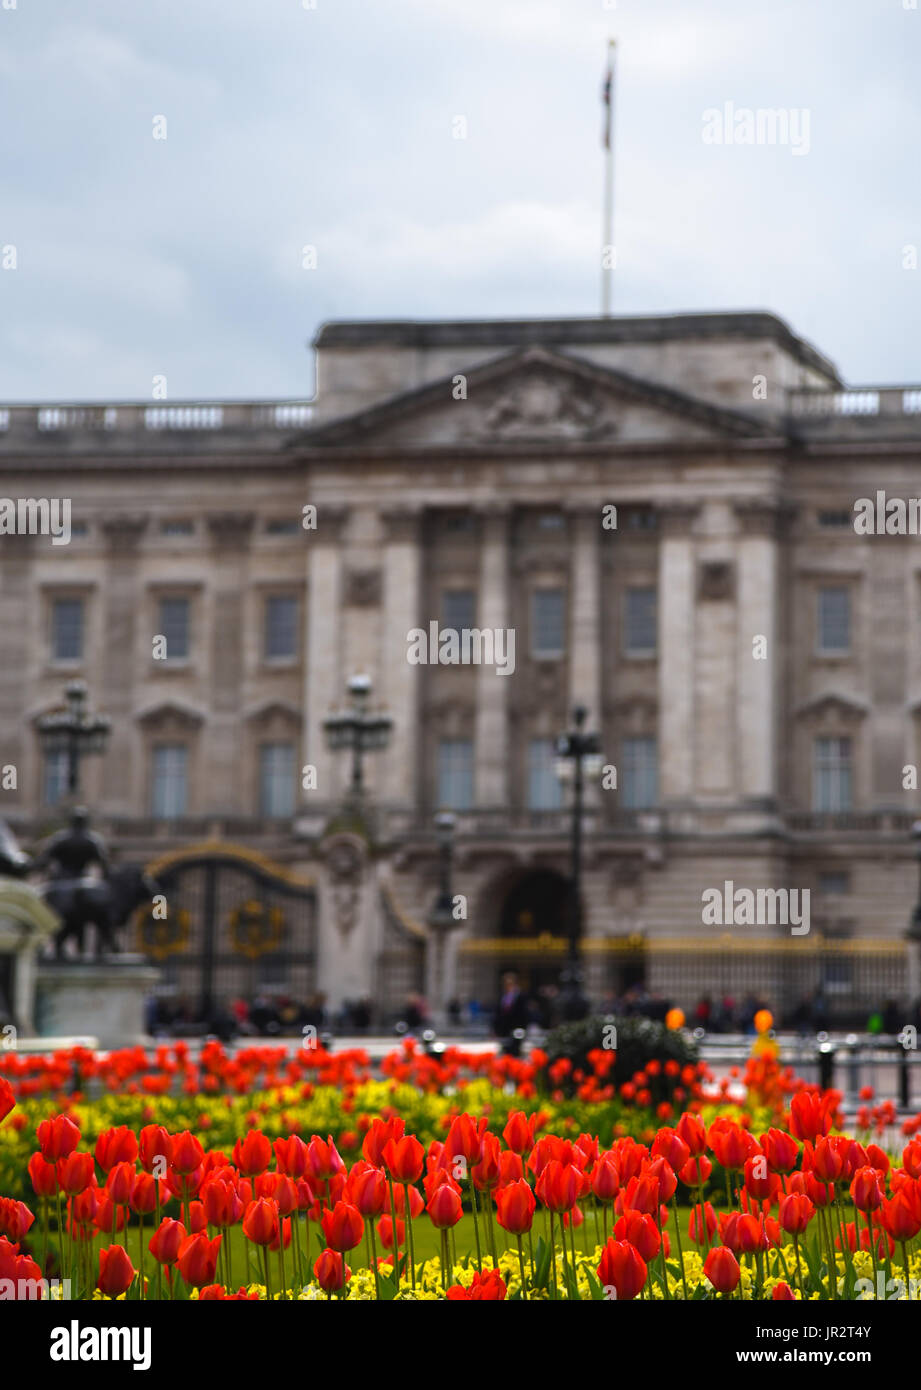 Flowers in front of Buckingham Palace Stock Photo